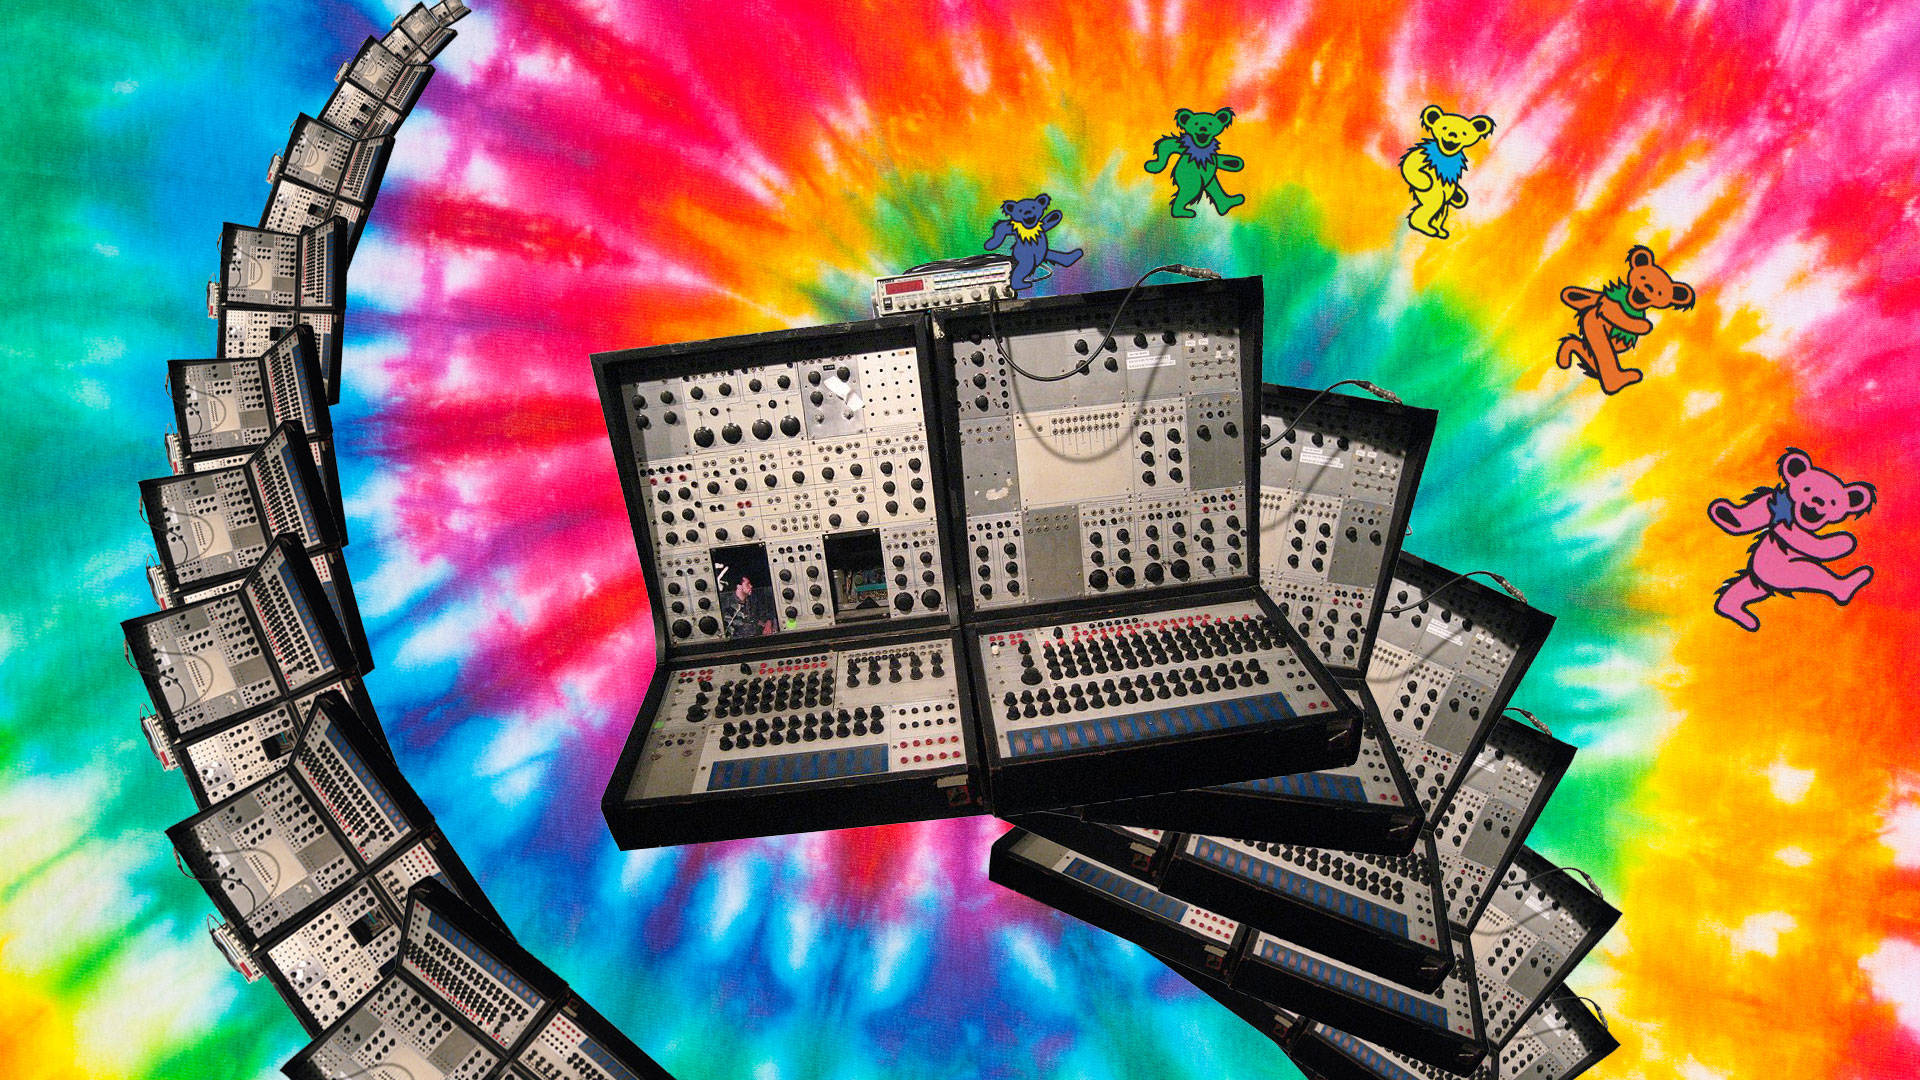 KPIX engineer Eliot Curtis found himself tripping on acid after cleaning a vintage synthesizer from the 1960s. Images: Wikimedia Commons, Shutterstock, Collage: Sarah Hotchkiss